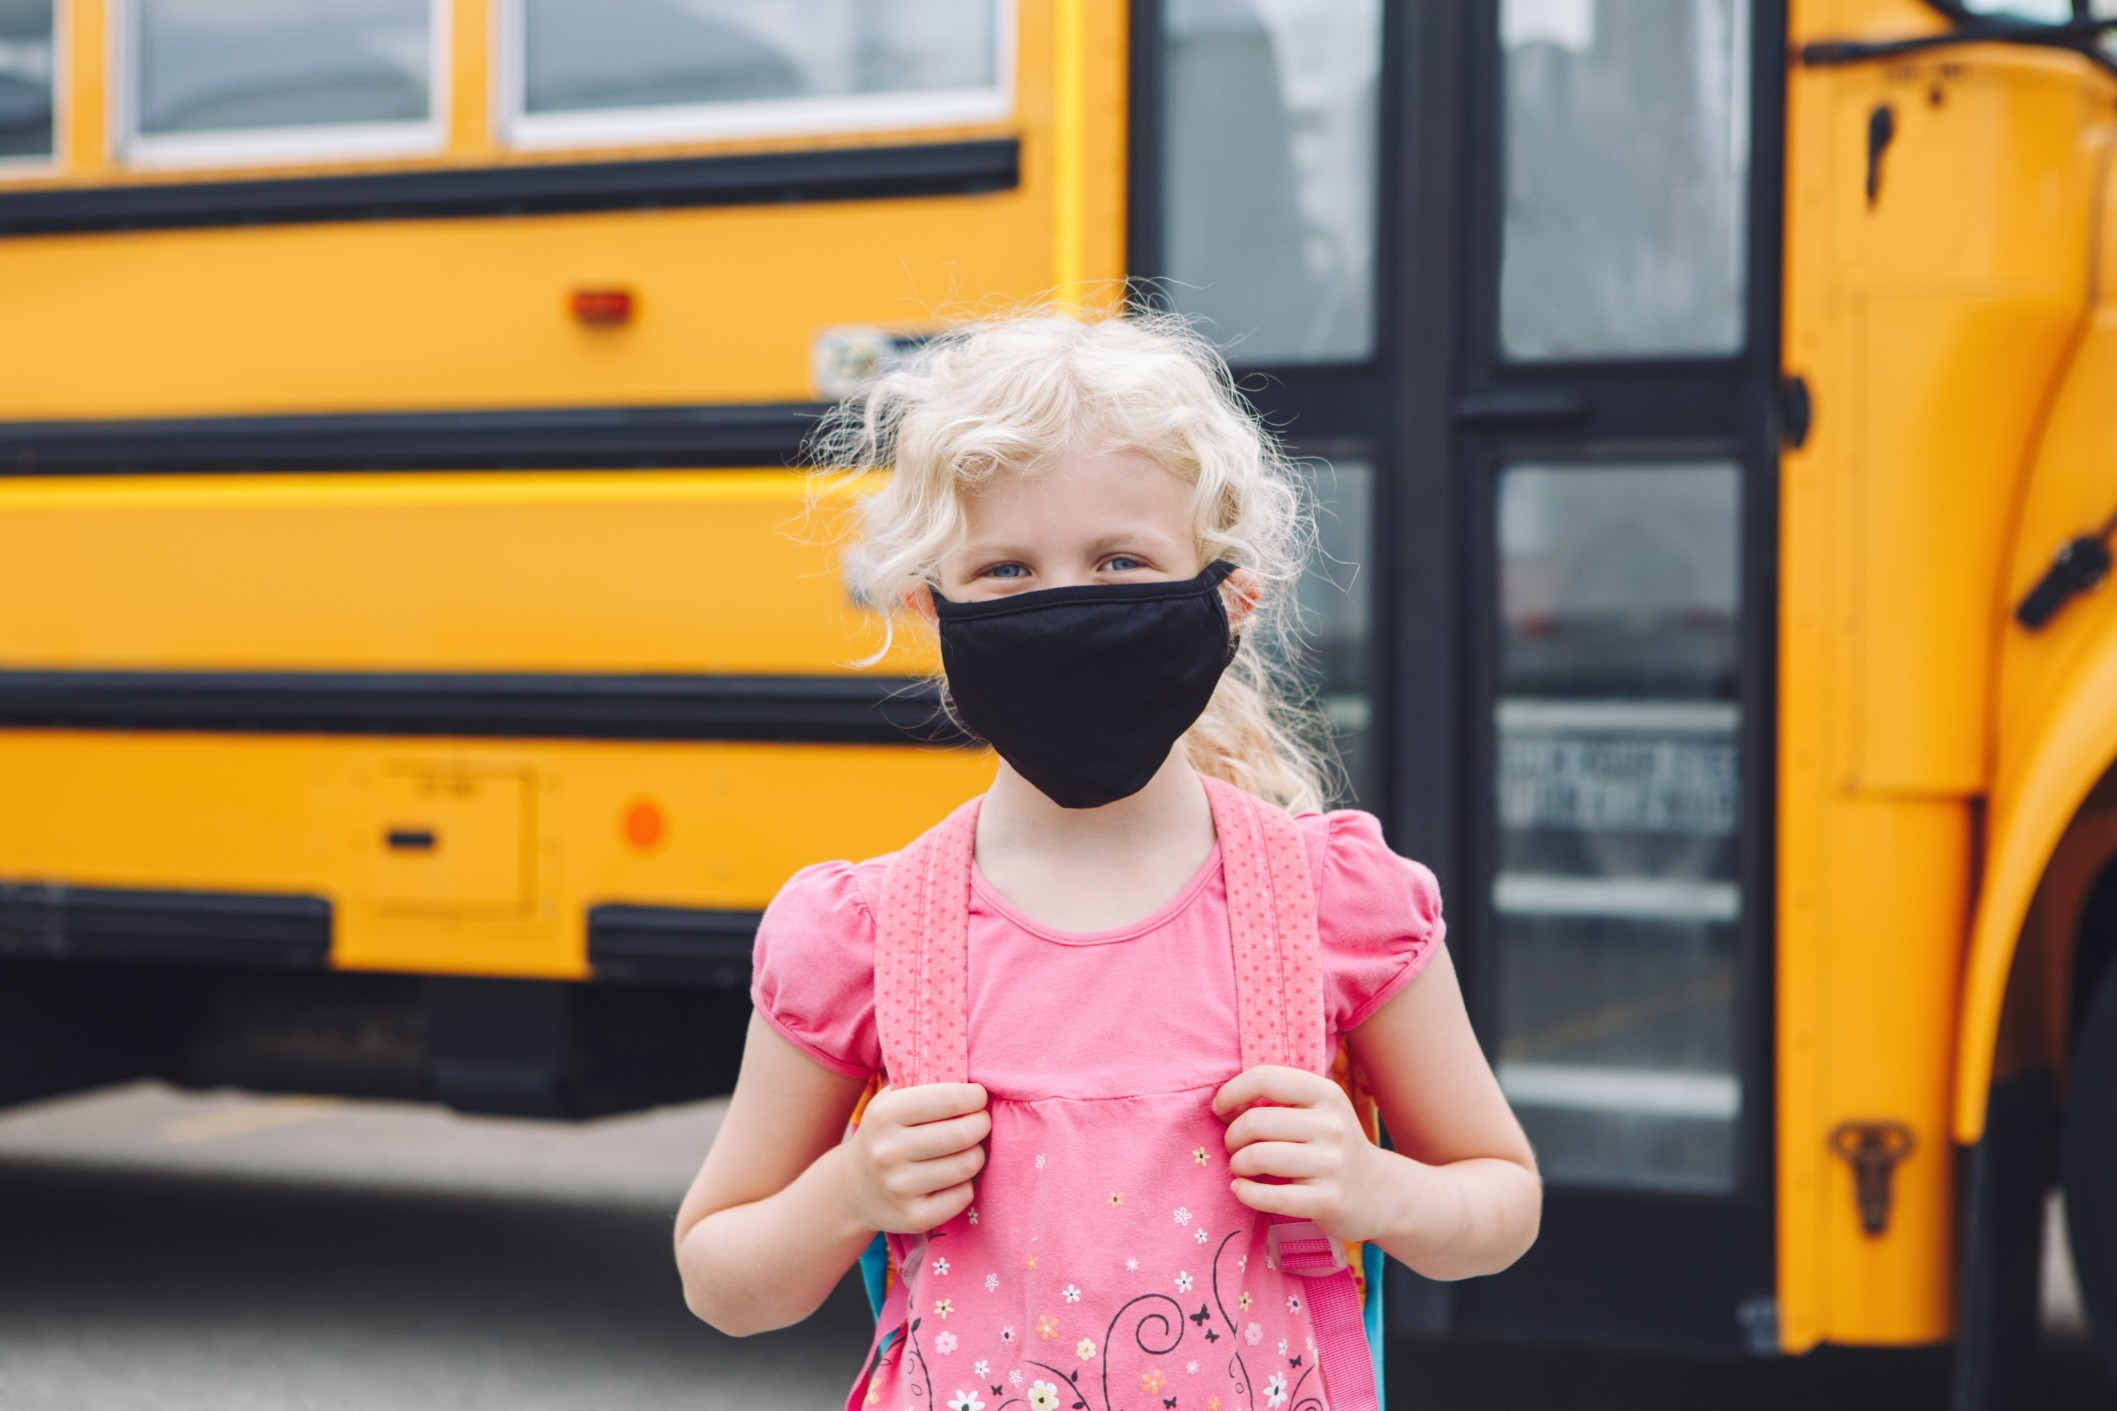 Illustrating the importance of understanding COVID-19 data to keep your family healthy. Image is school-age child with mask